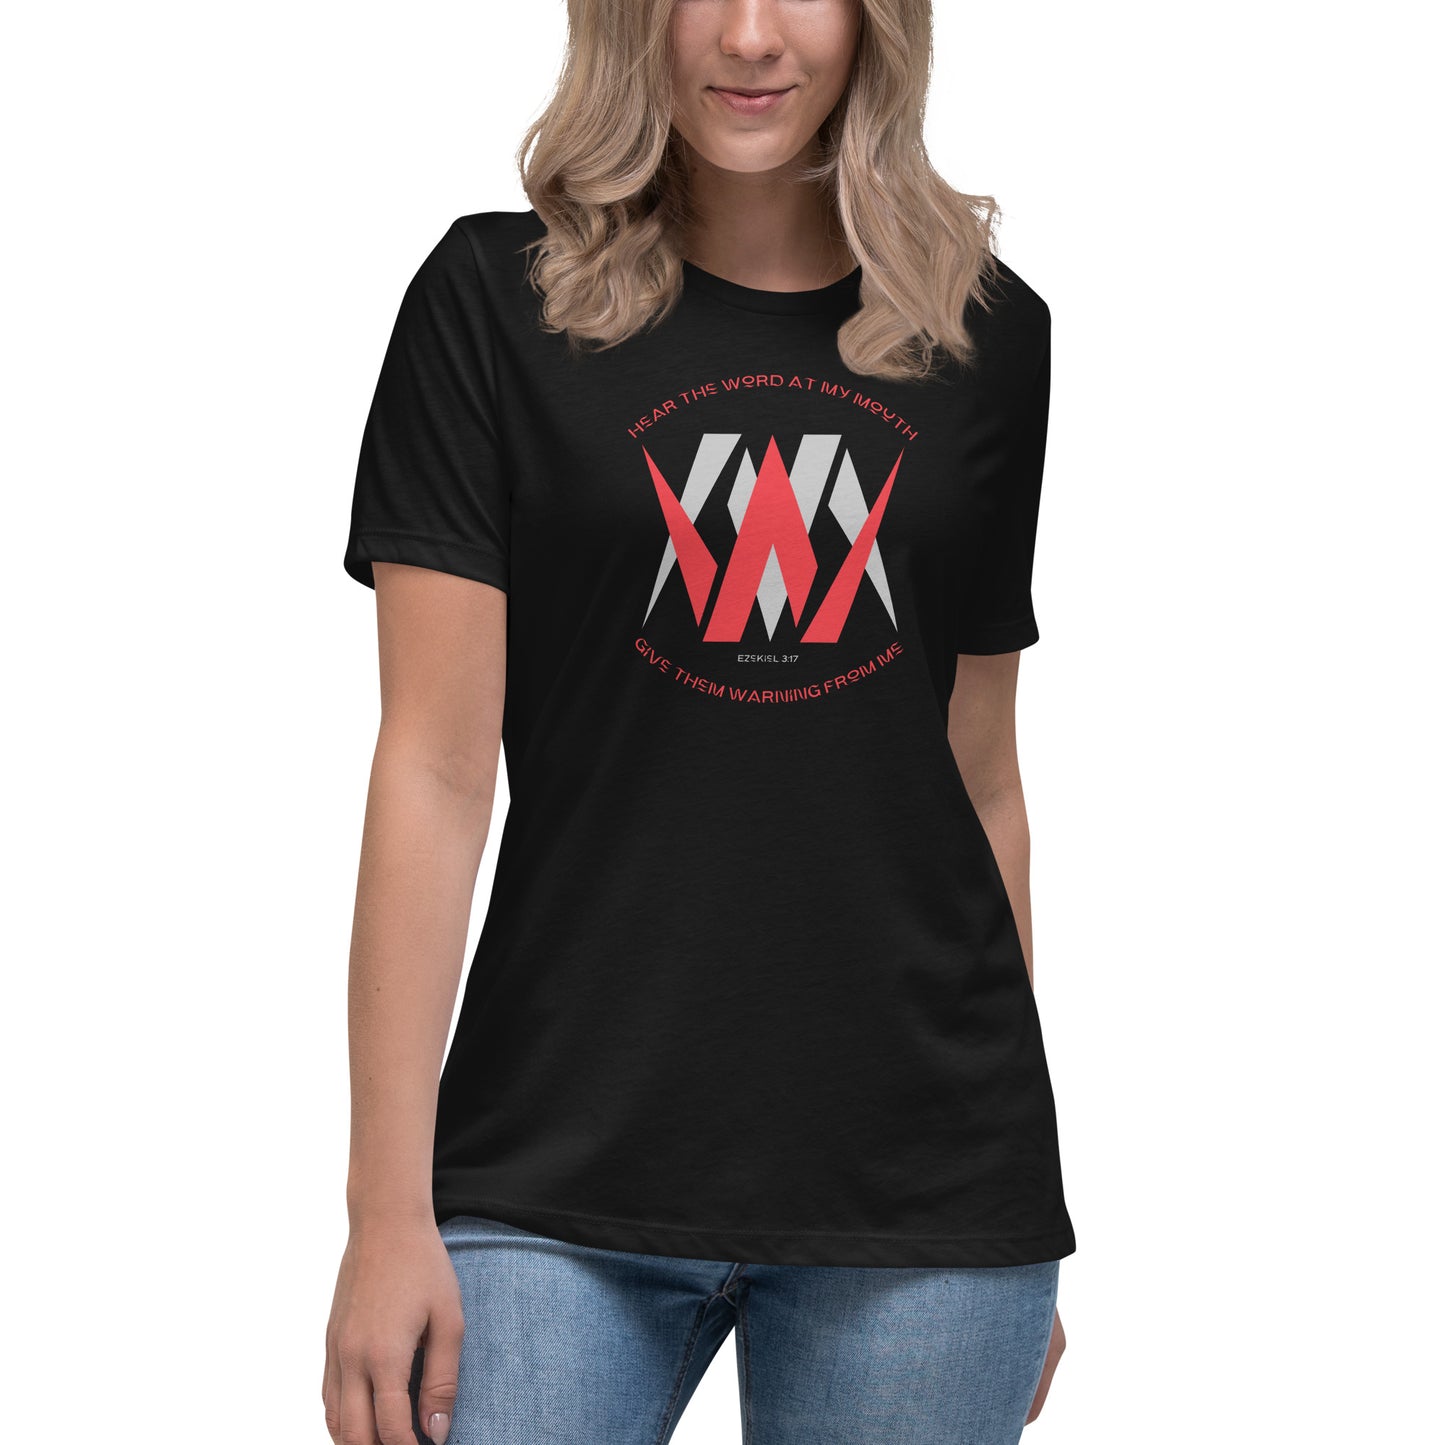 WM Hear The Word At My Mouth Give Them Warning From Me Women's Relaxed T-Shirt